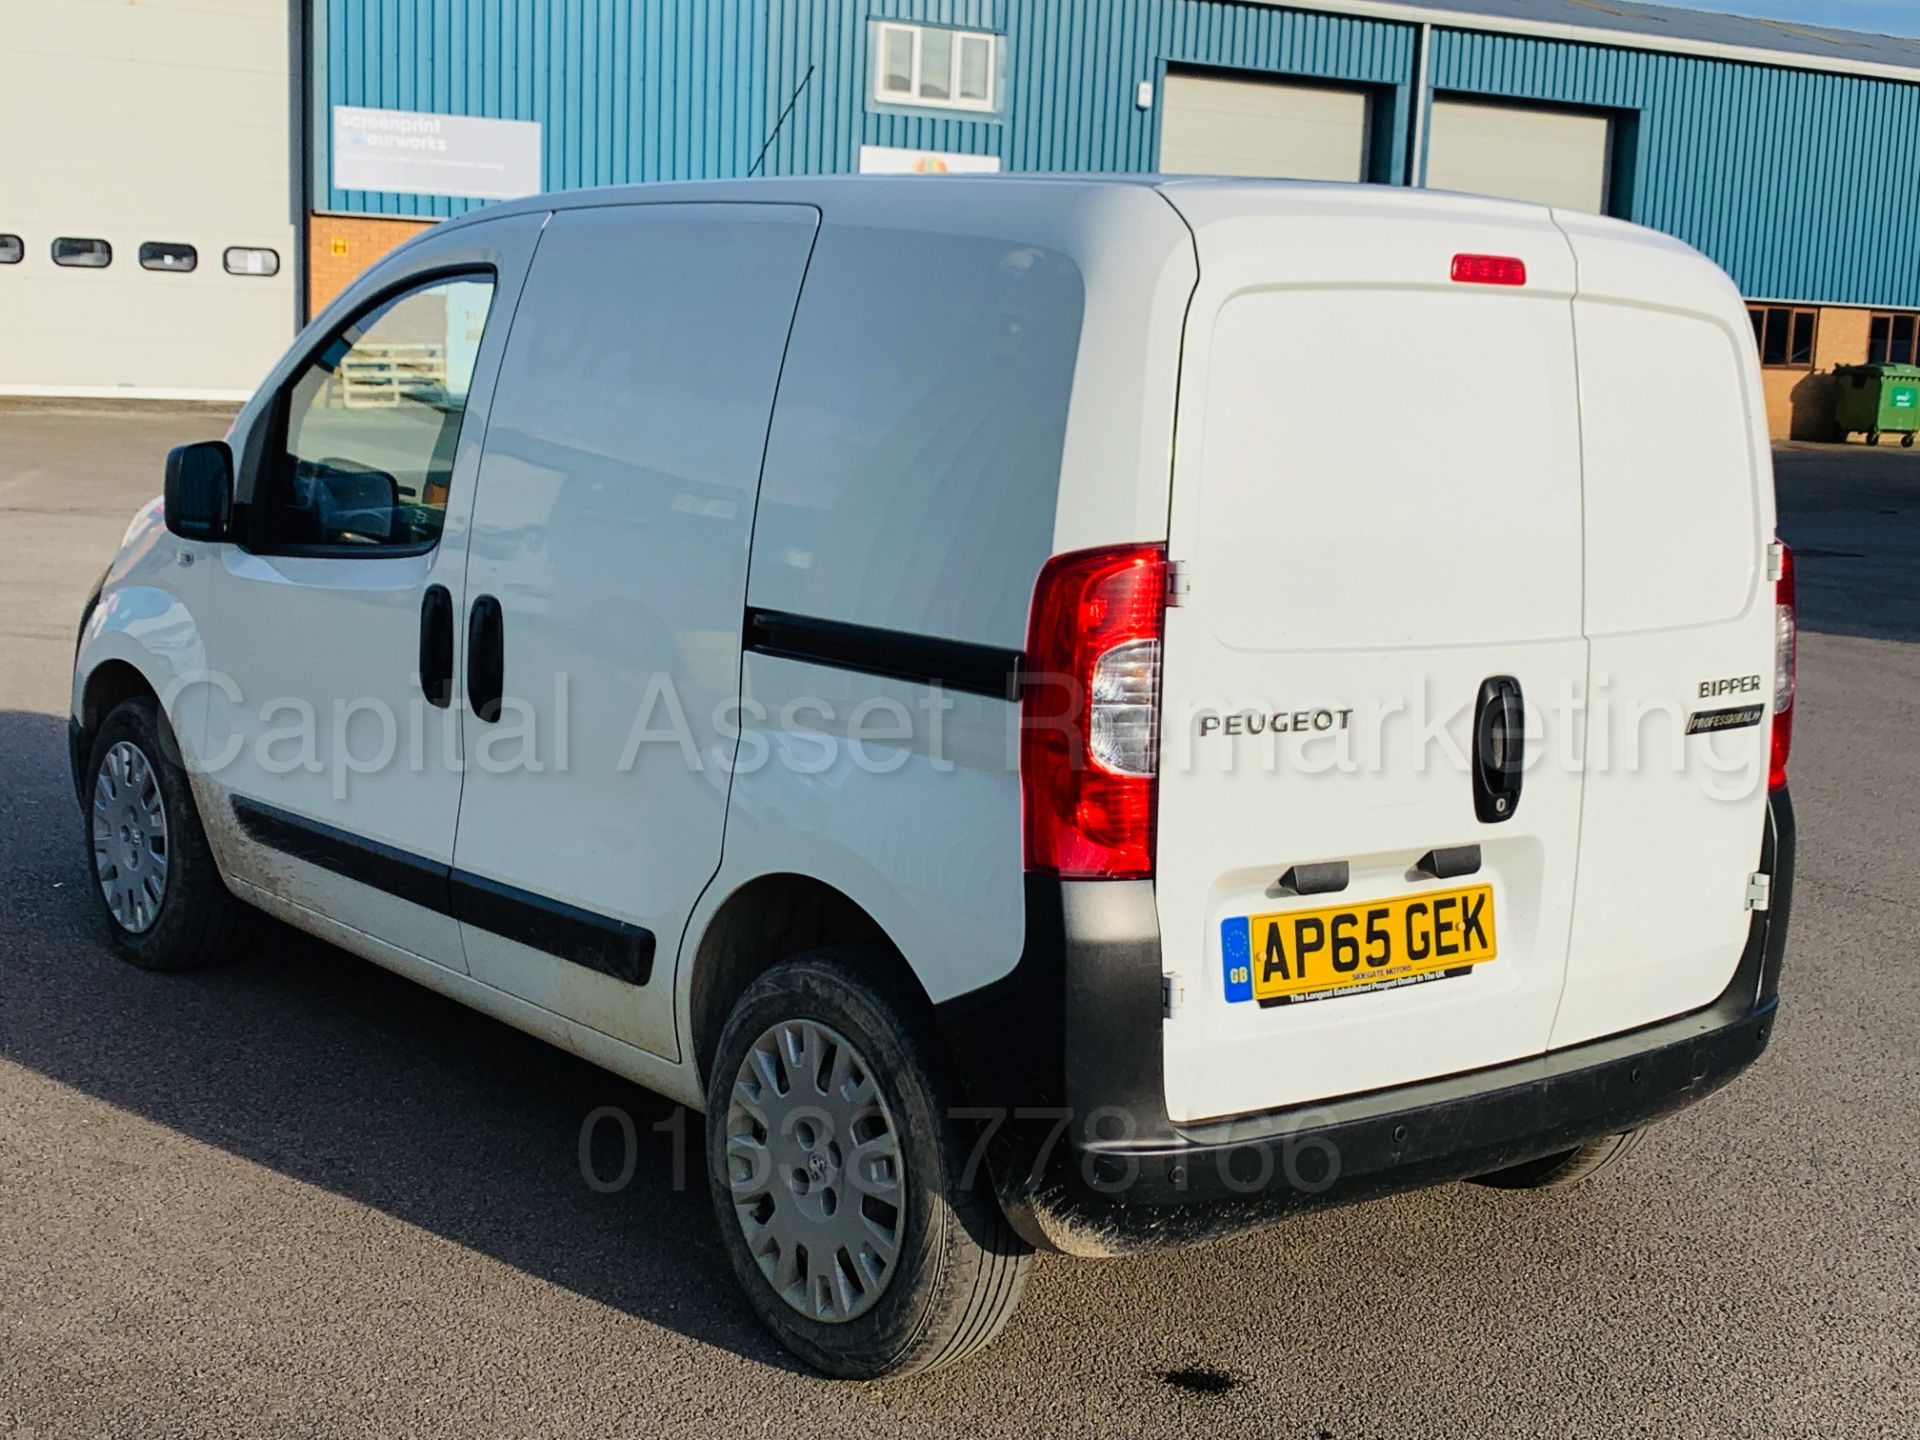 (On Sale) PEUGEOT BIPPER *PROFESSIONAL* LCV - PANEL VAN (65 REG) 'HDI - 5 SPEED' (1 OWNER) *AIR CON* - Image 7 of 36